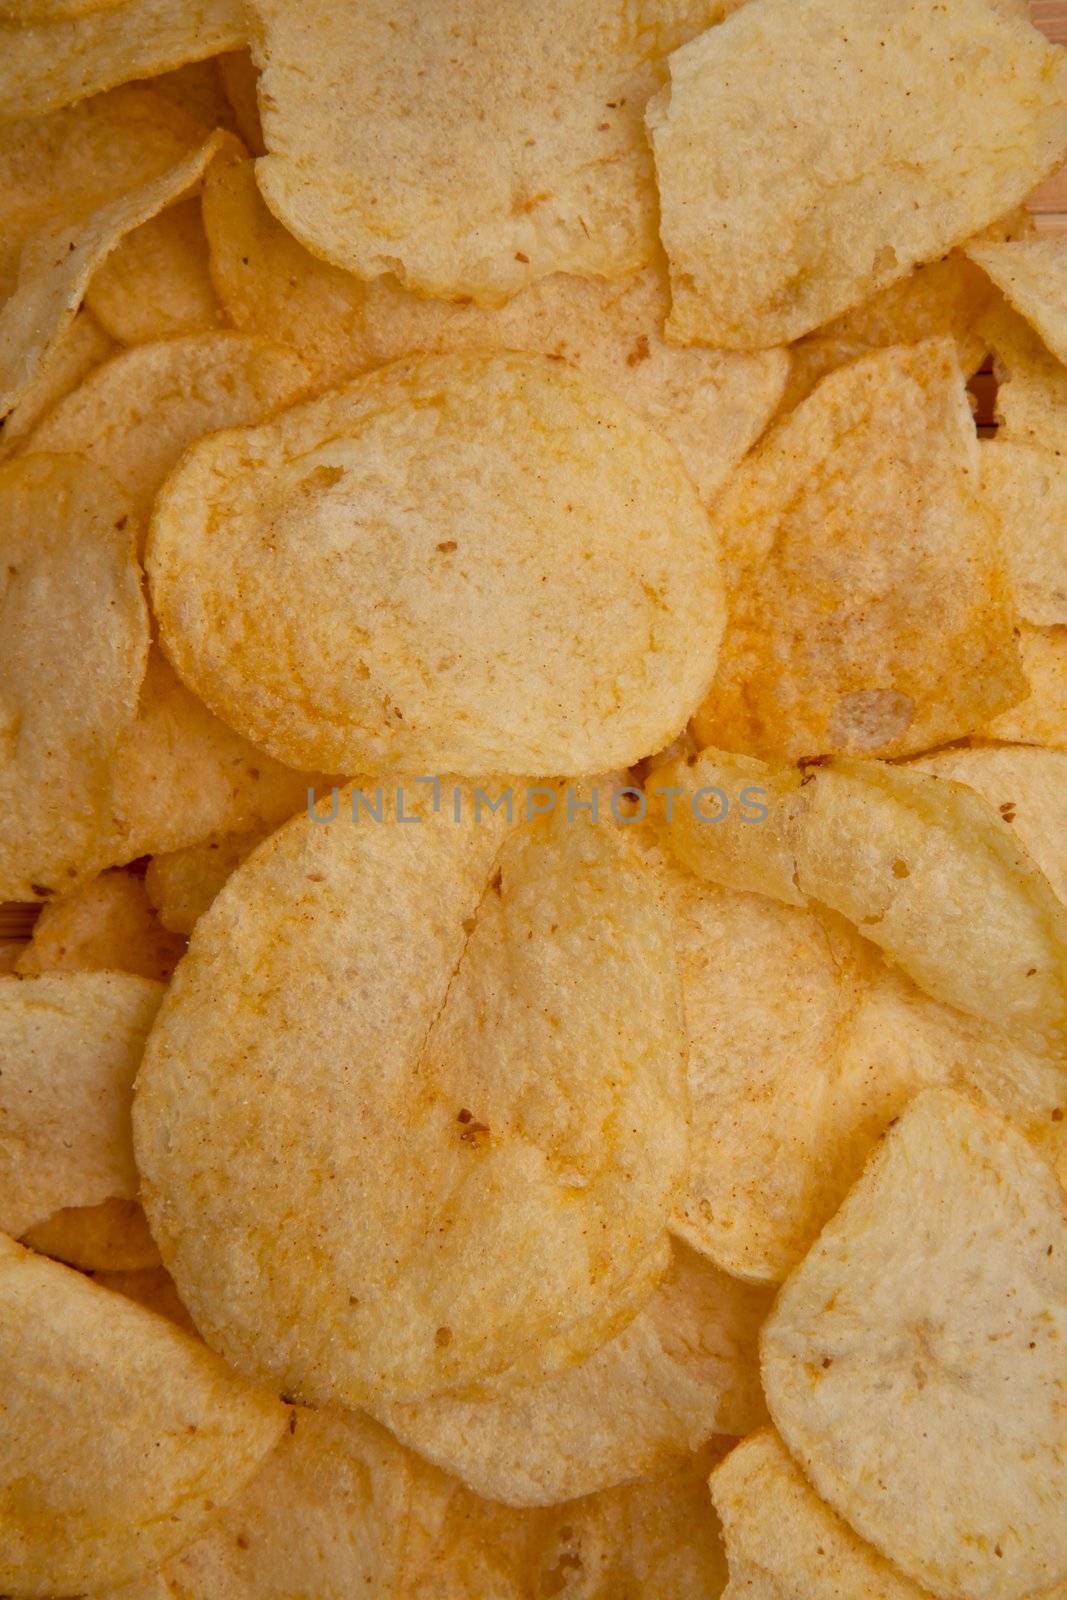 Many chips laid out together